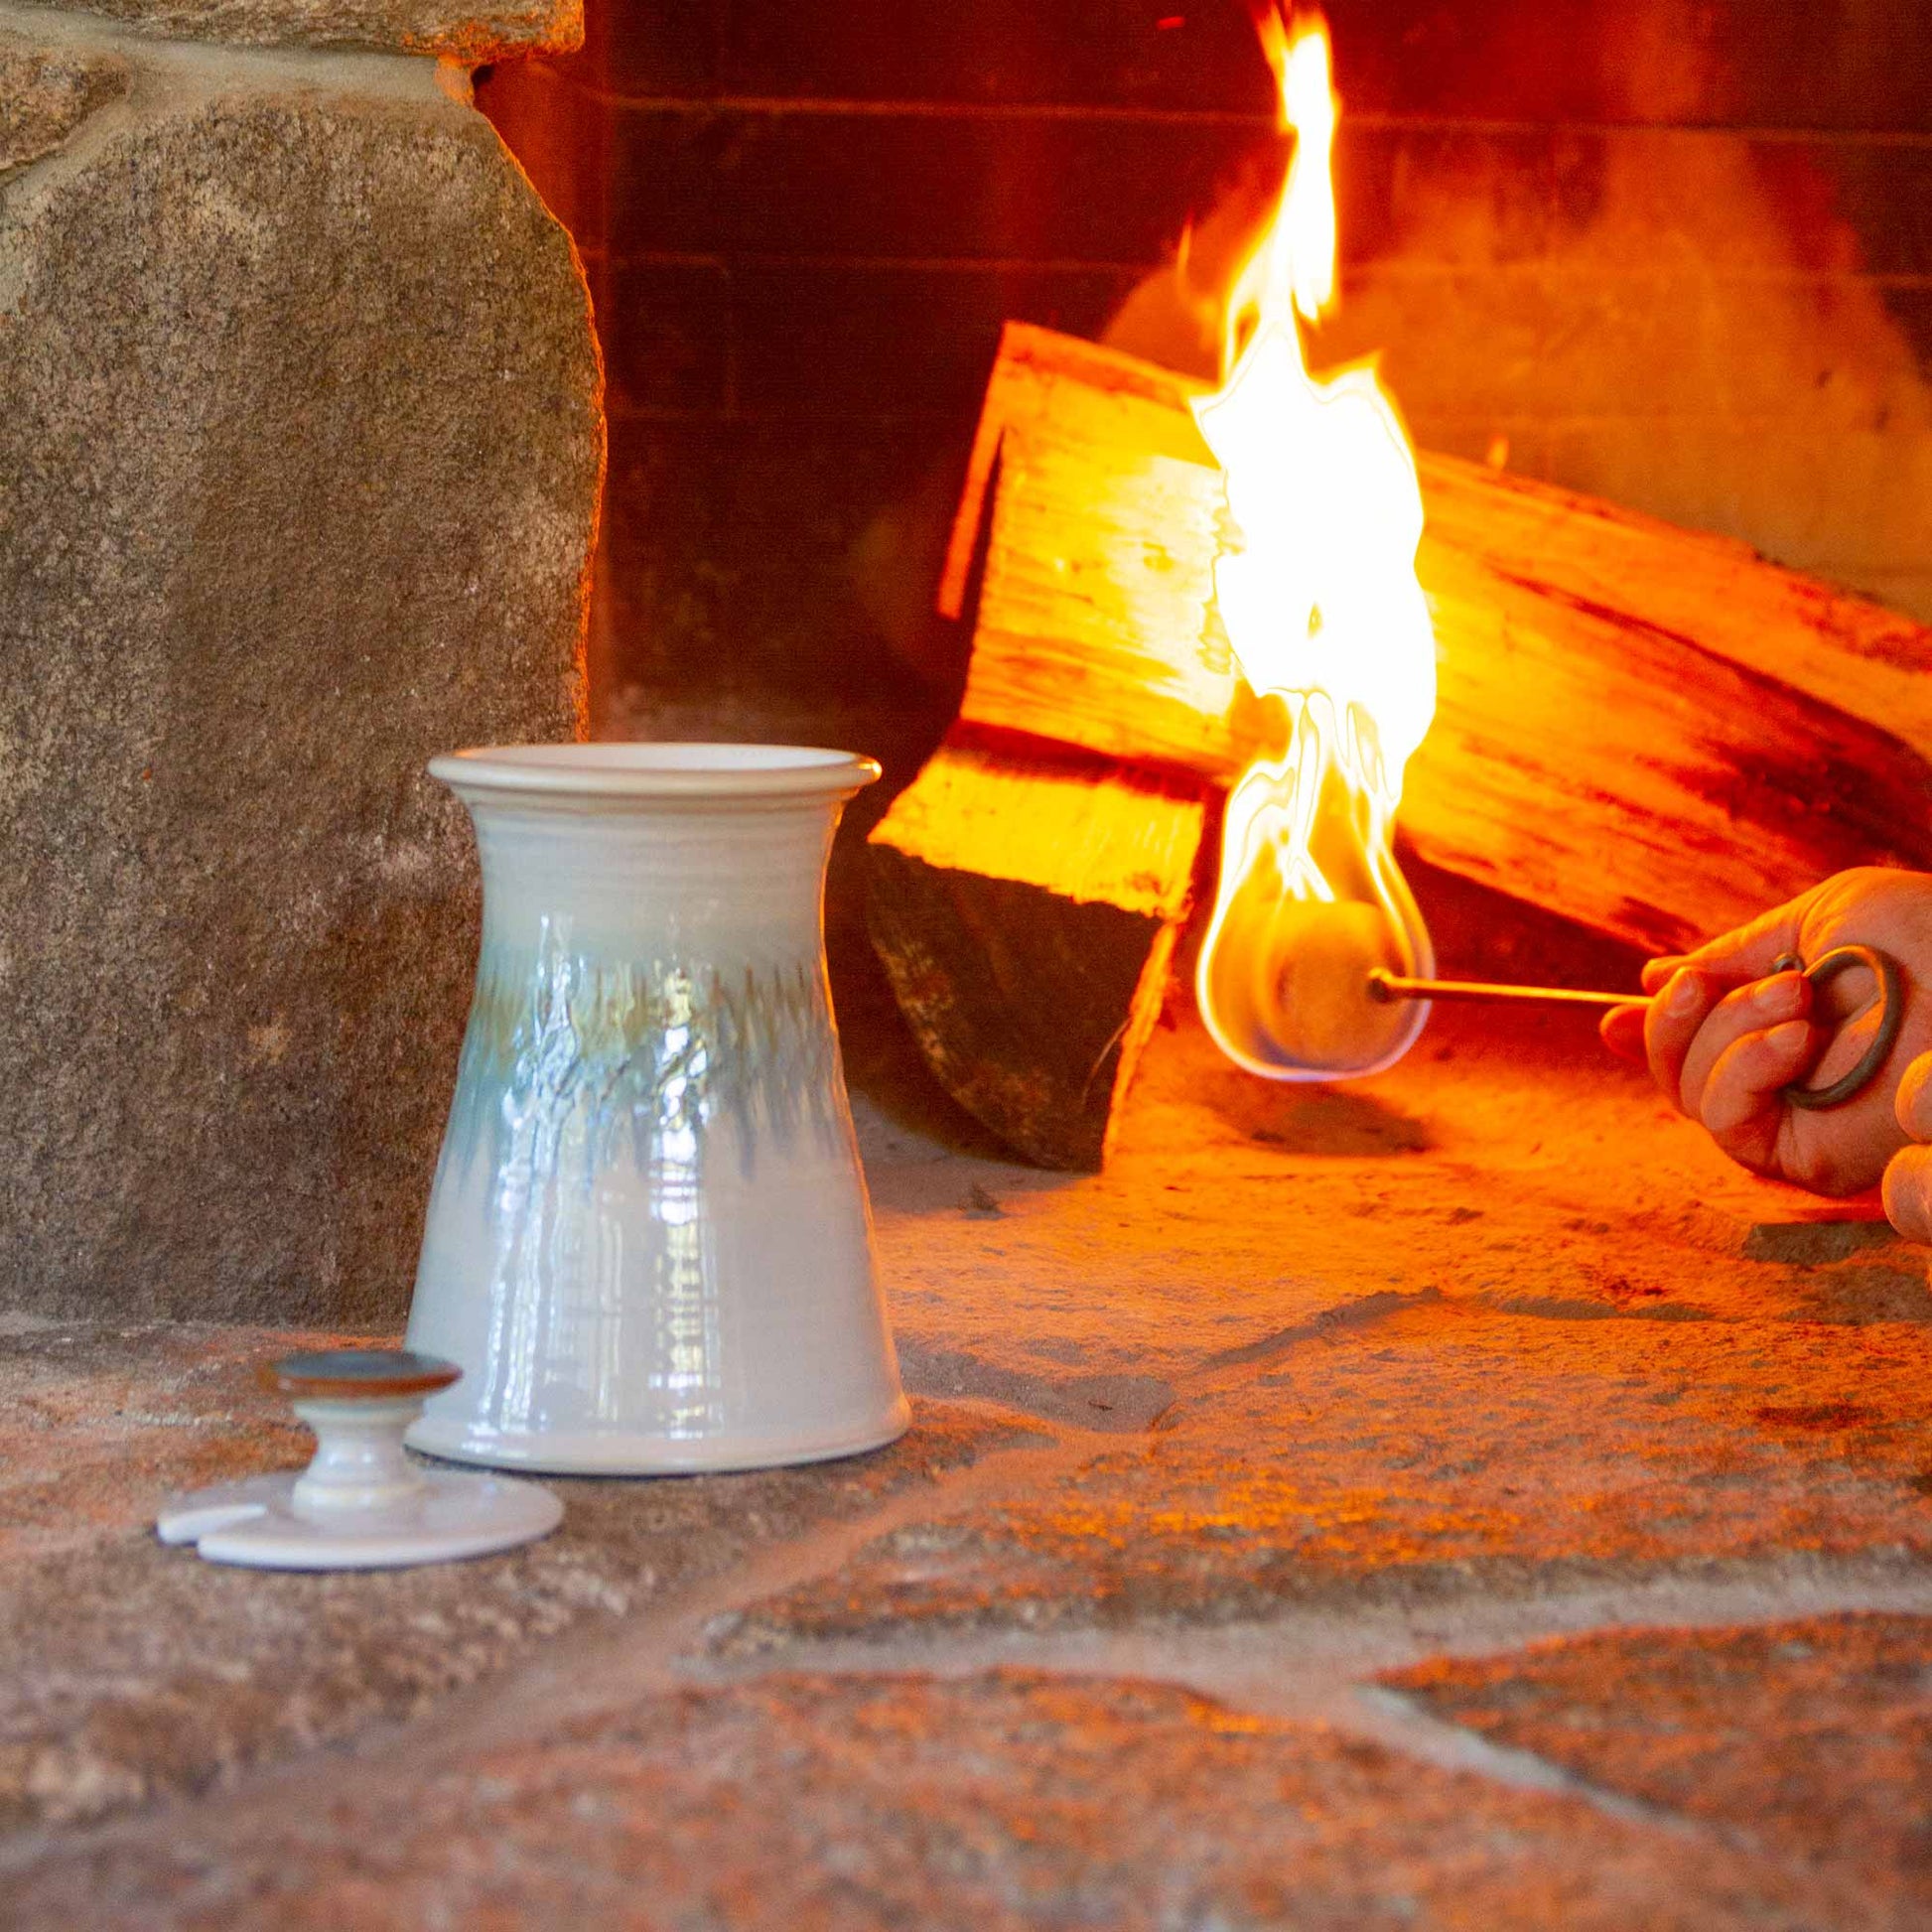 Handmade Pottery Firelighter  made by Georgetown Pottery in Maine